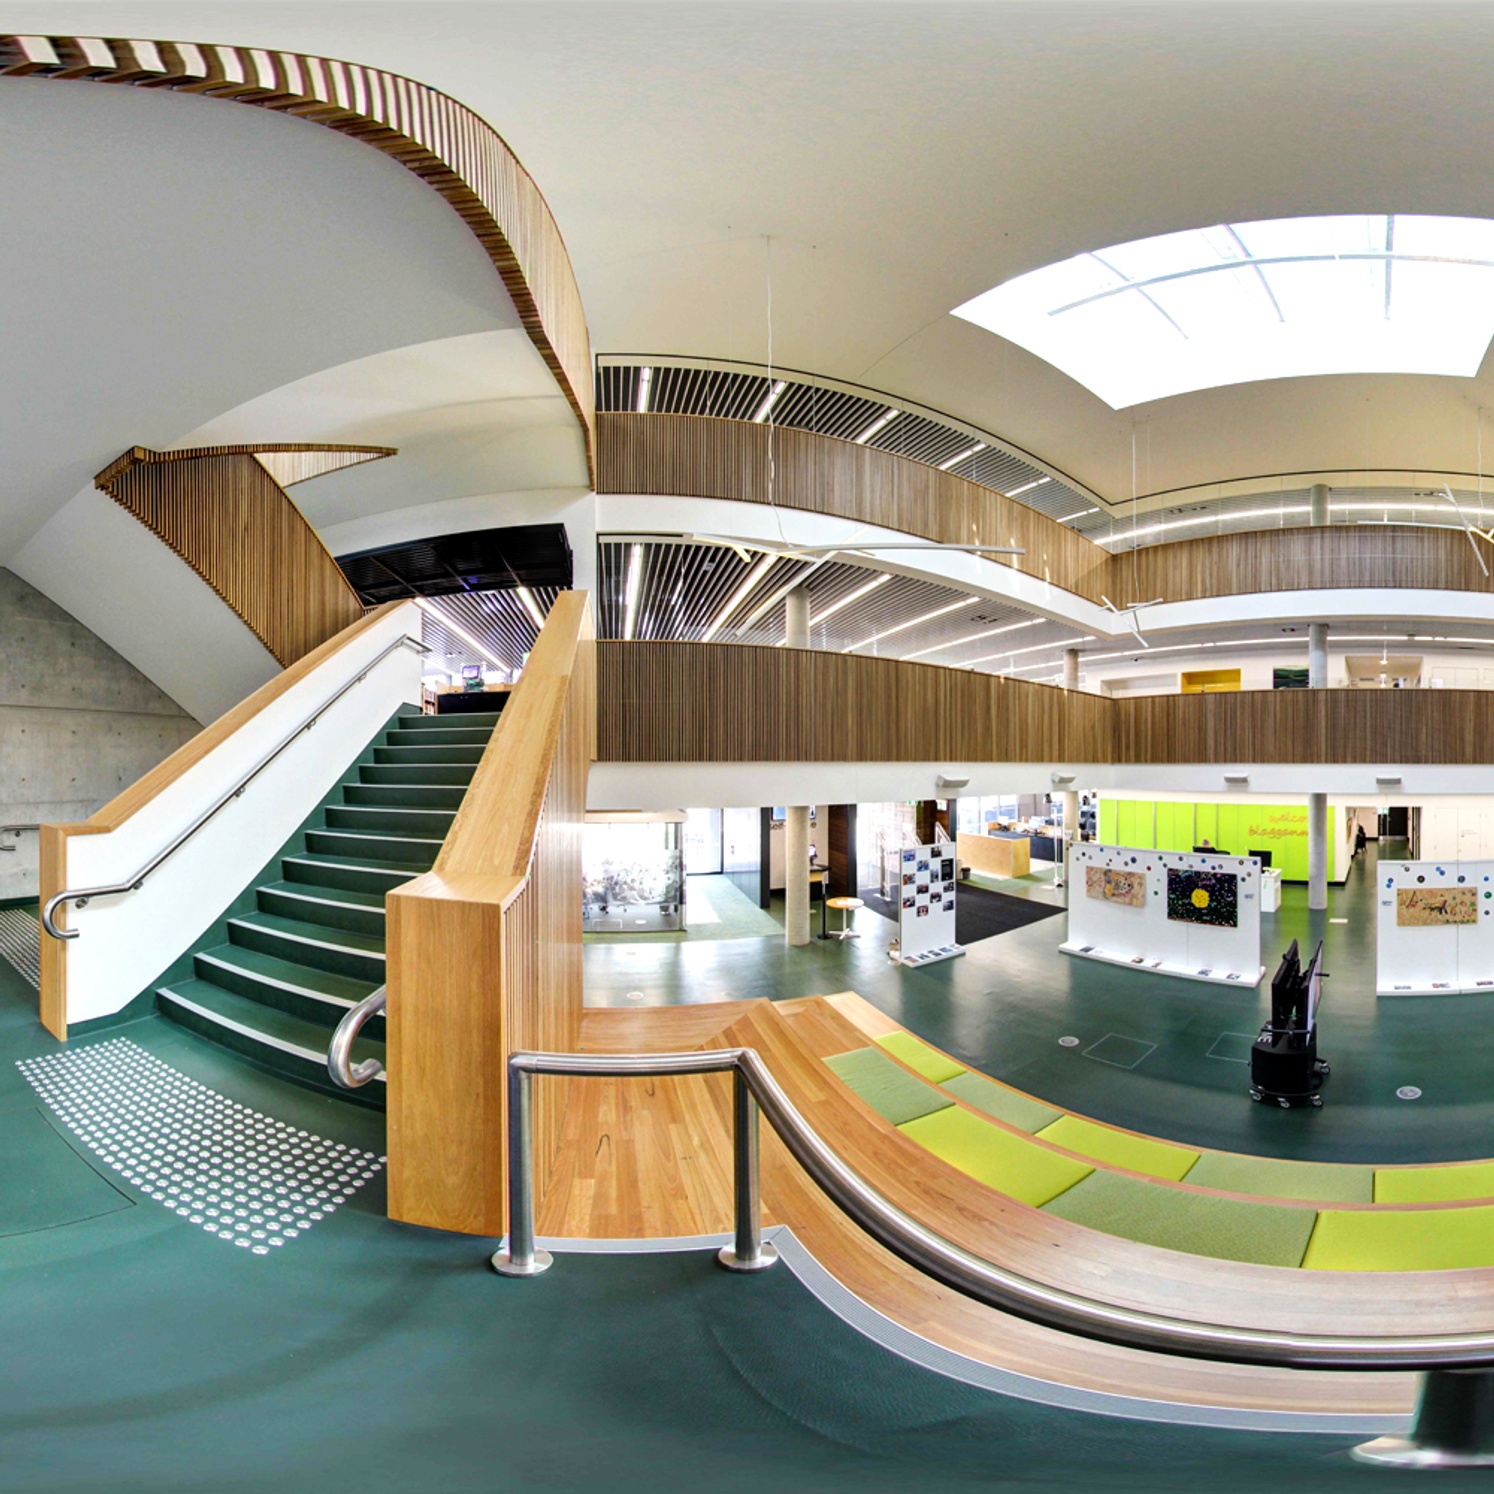 360 degree image of Lismore Learning Centre